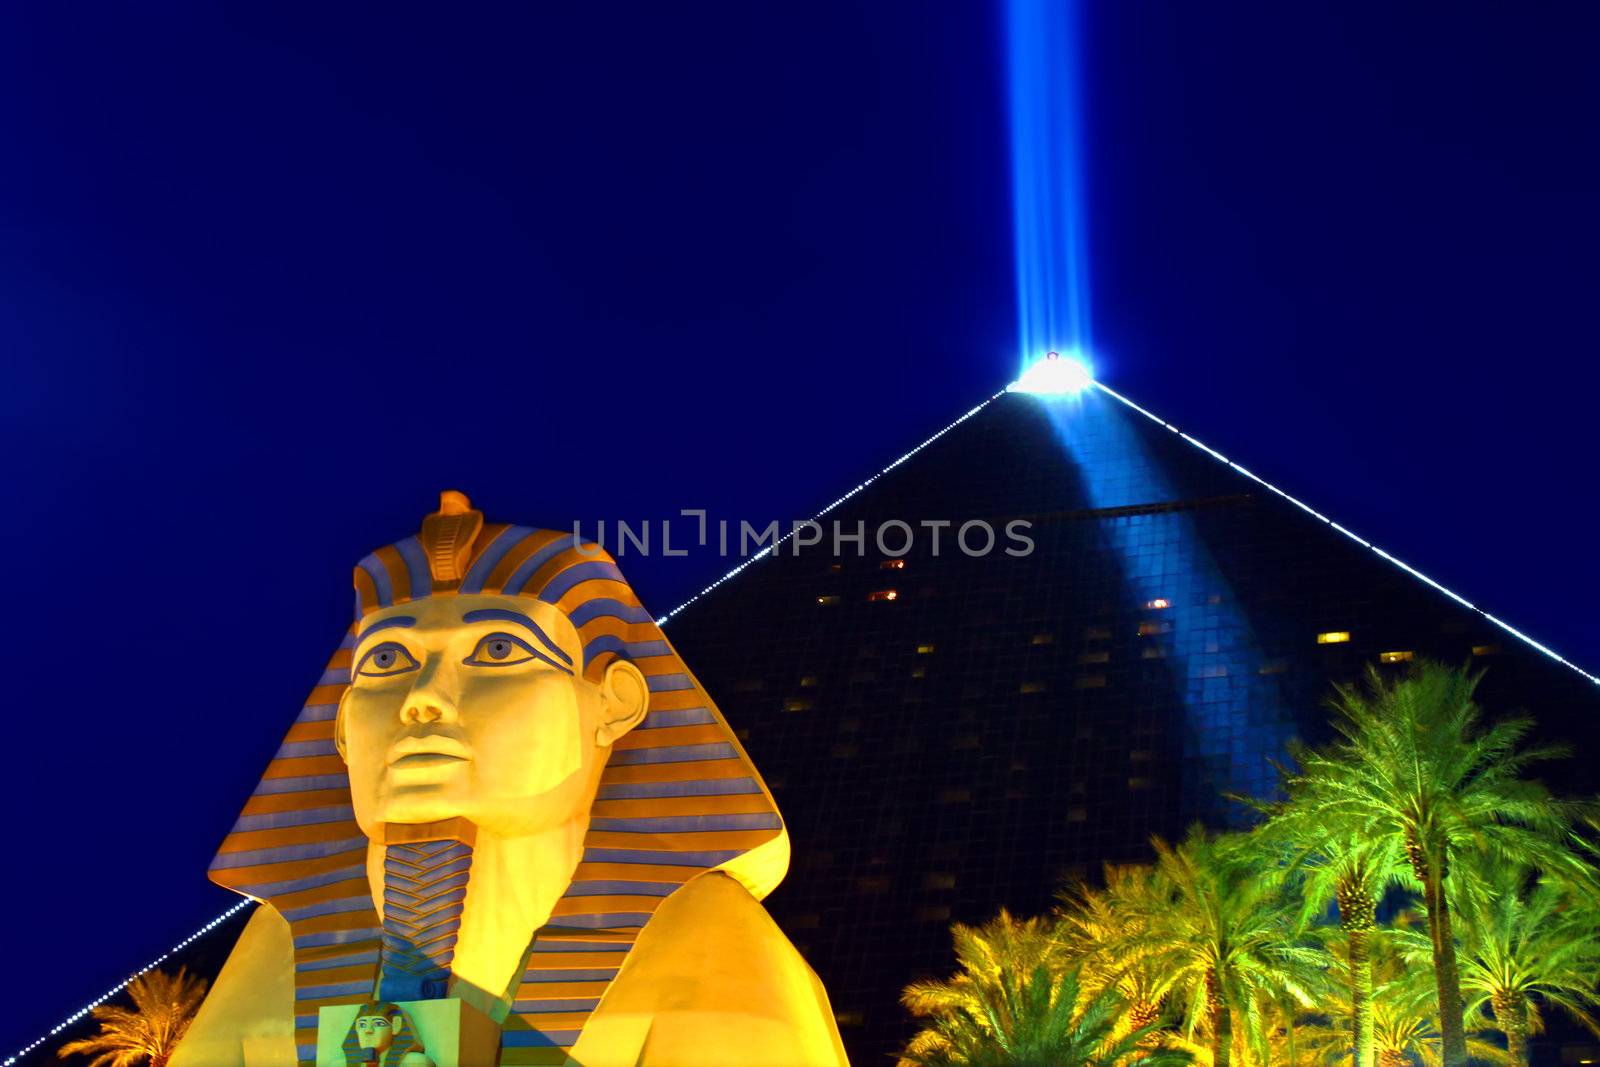 Las Vegas, USA - October 29, 2011: Luxor Las Vegas is an Egyptian themed hotel and casino on the famous Las Vegas Strip. The hotel was opened in 1993 and contains a replica of the Great Sphinx of Giza and a pyramid shaped building with a spotlight.